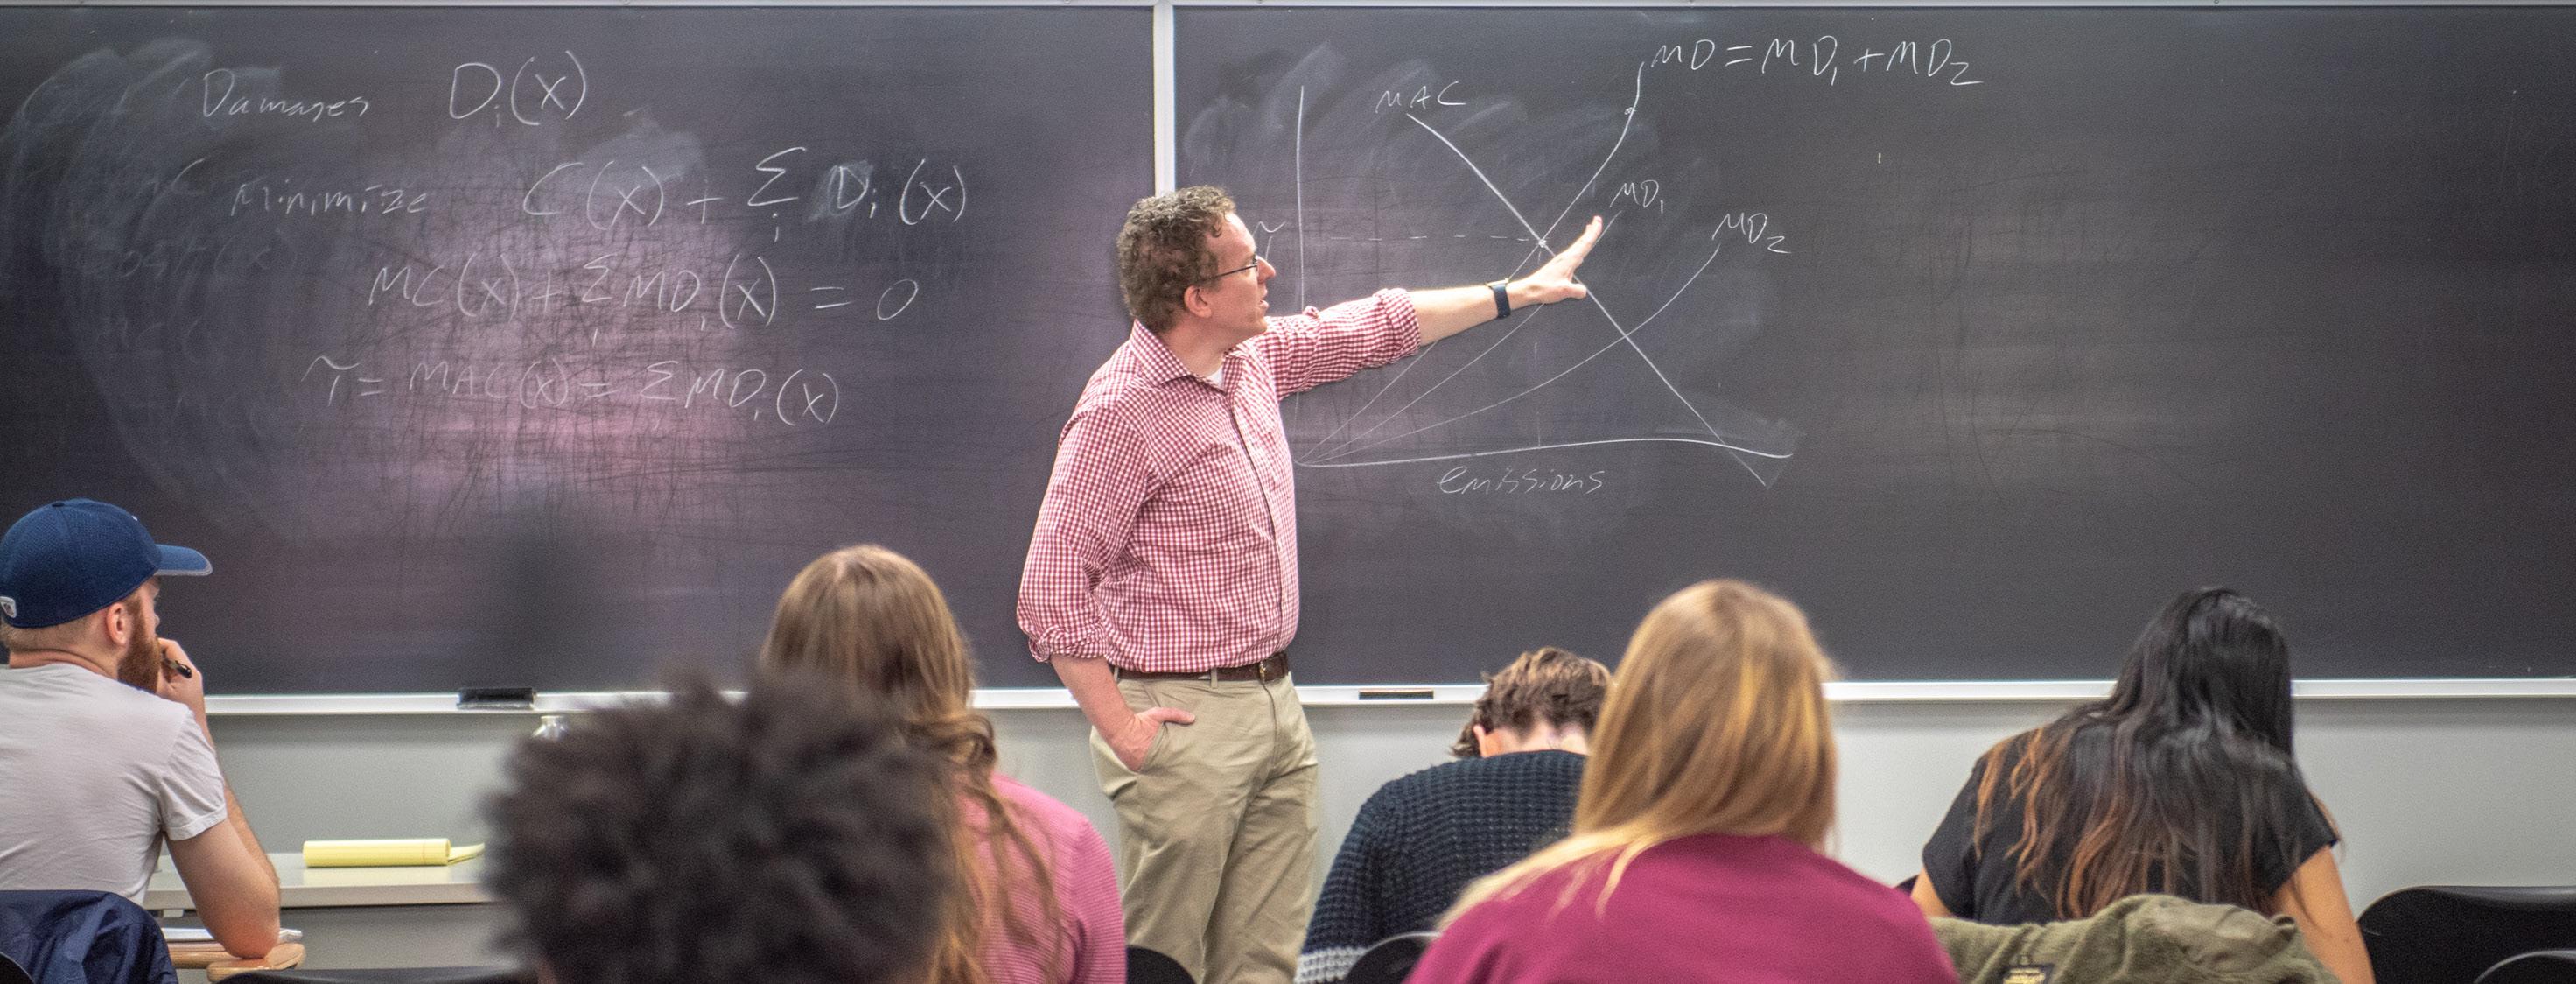 Instructor (man) pointing at a chalkboard